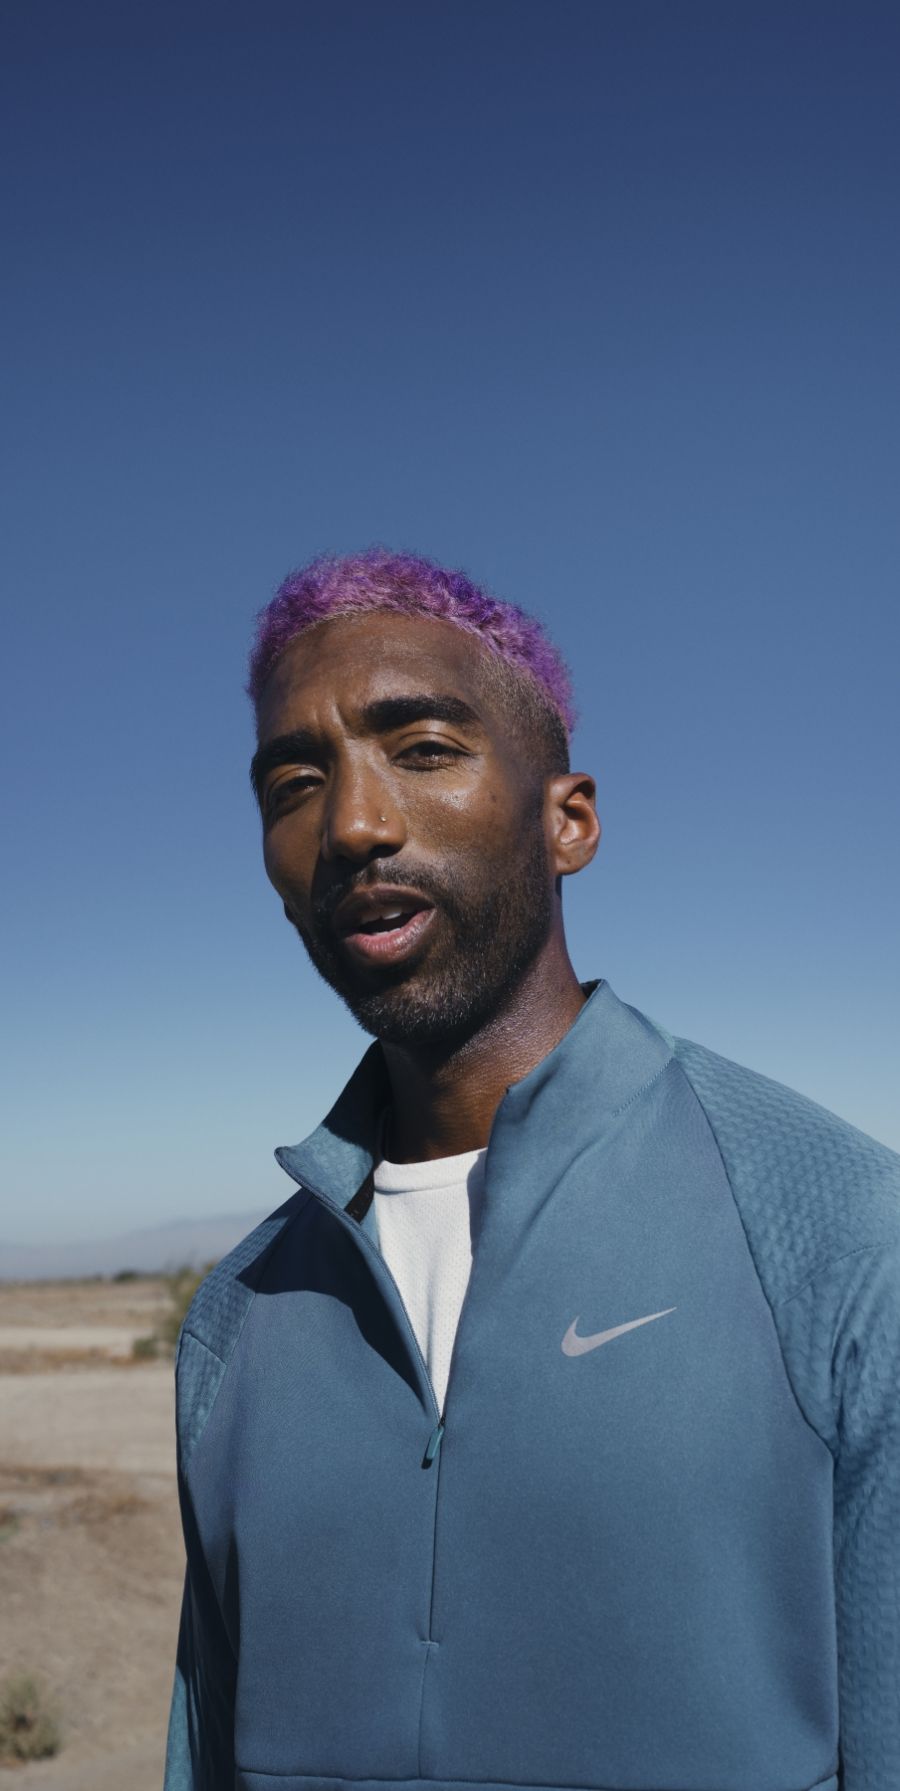 Runner with purple hair and blue running jacket looking into camera with desert and blue sky behind him